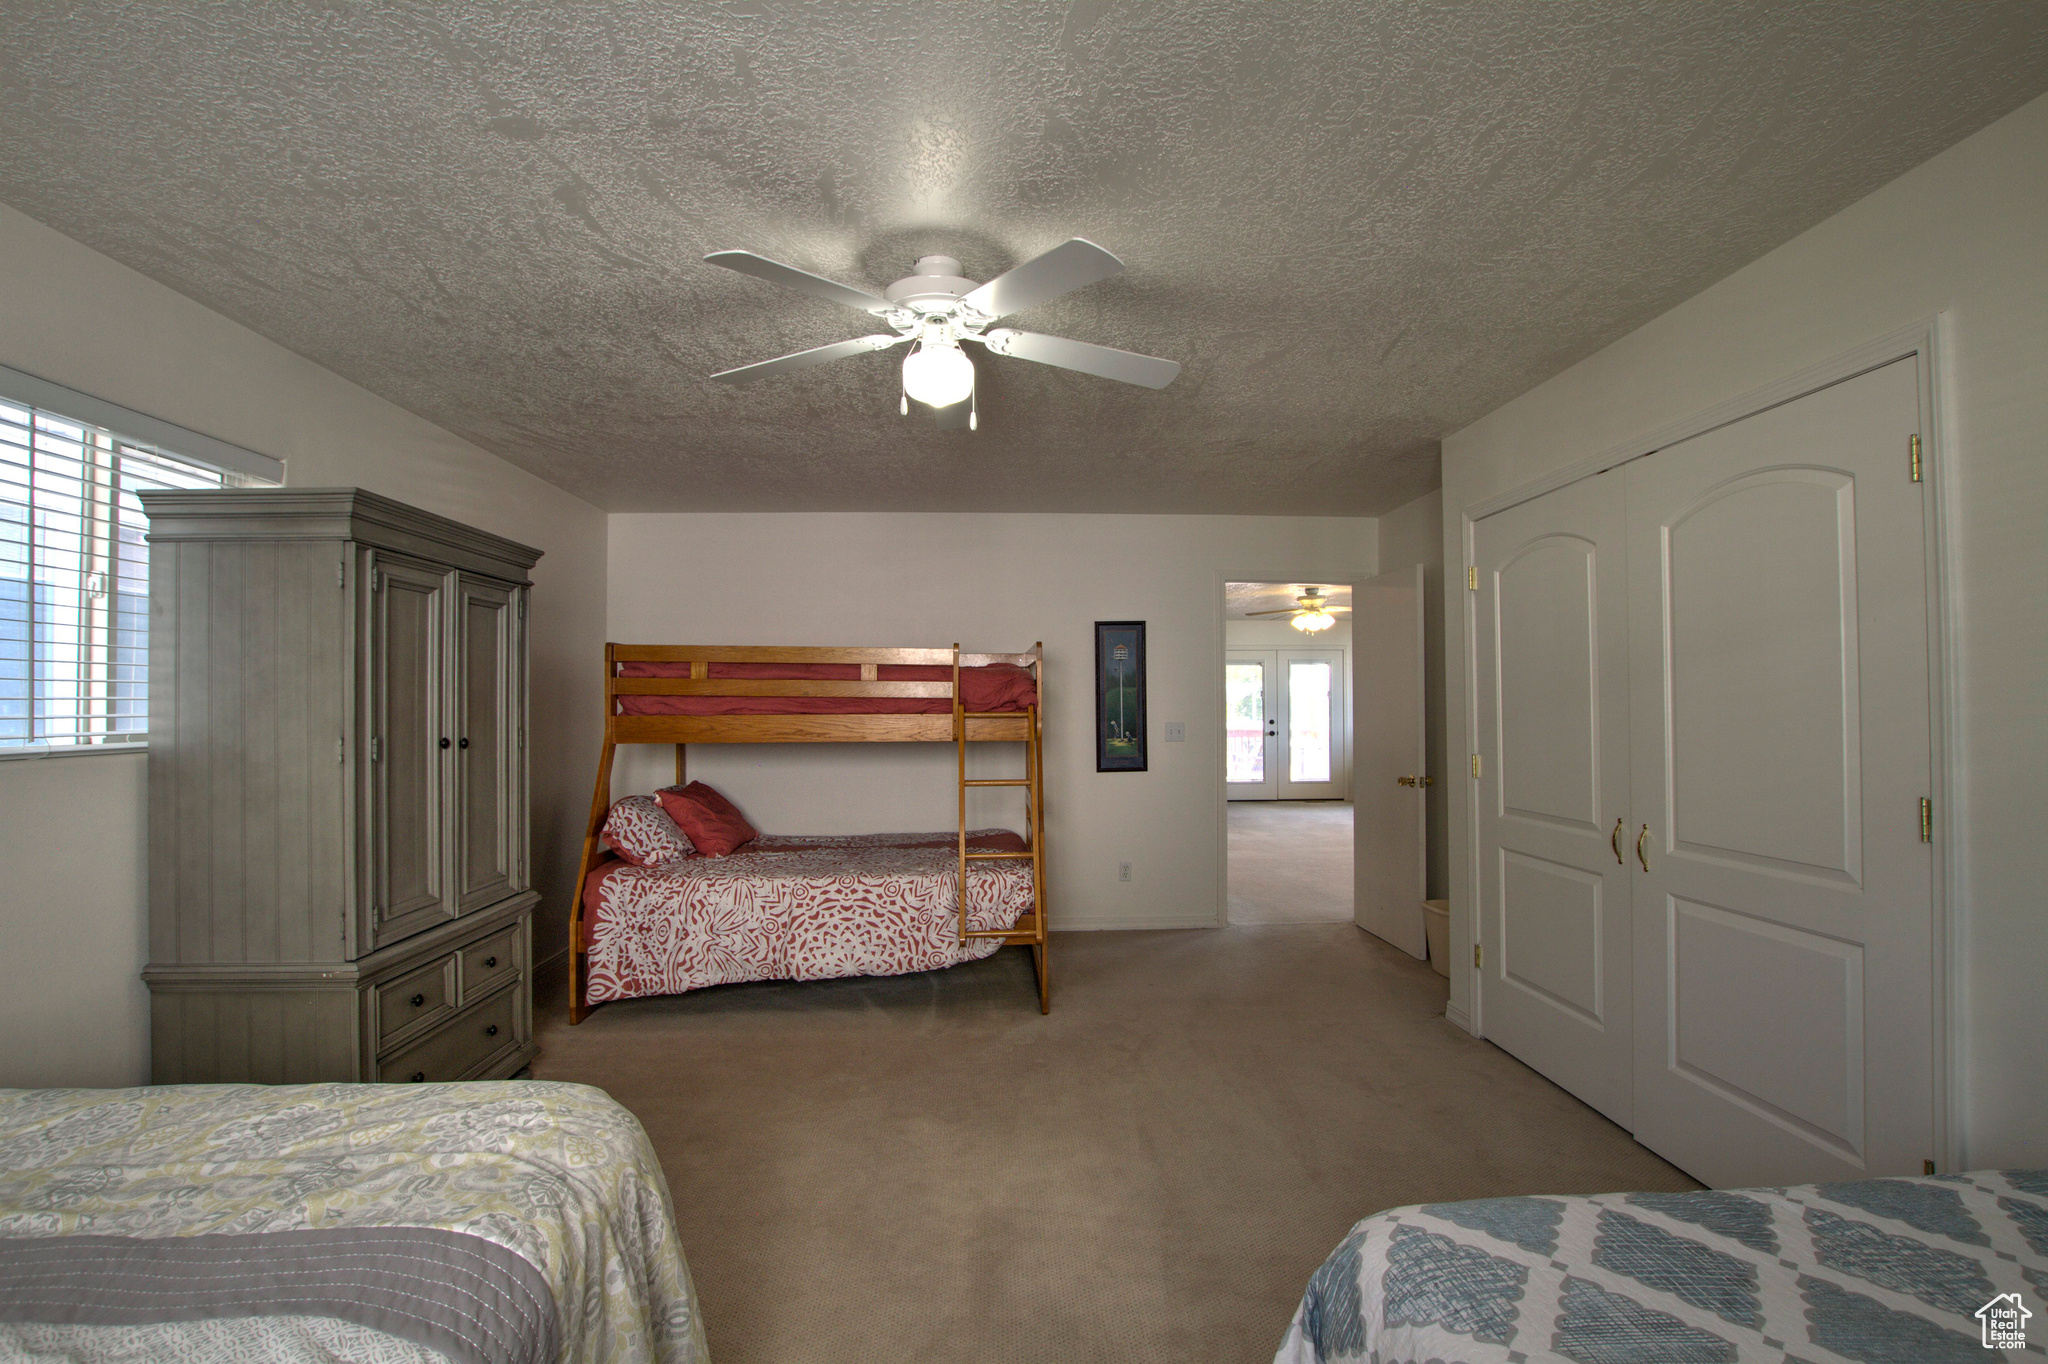 Bedroom with light colored carpet, multiple windows, ceiling fan, and a closet